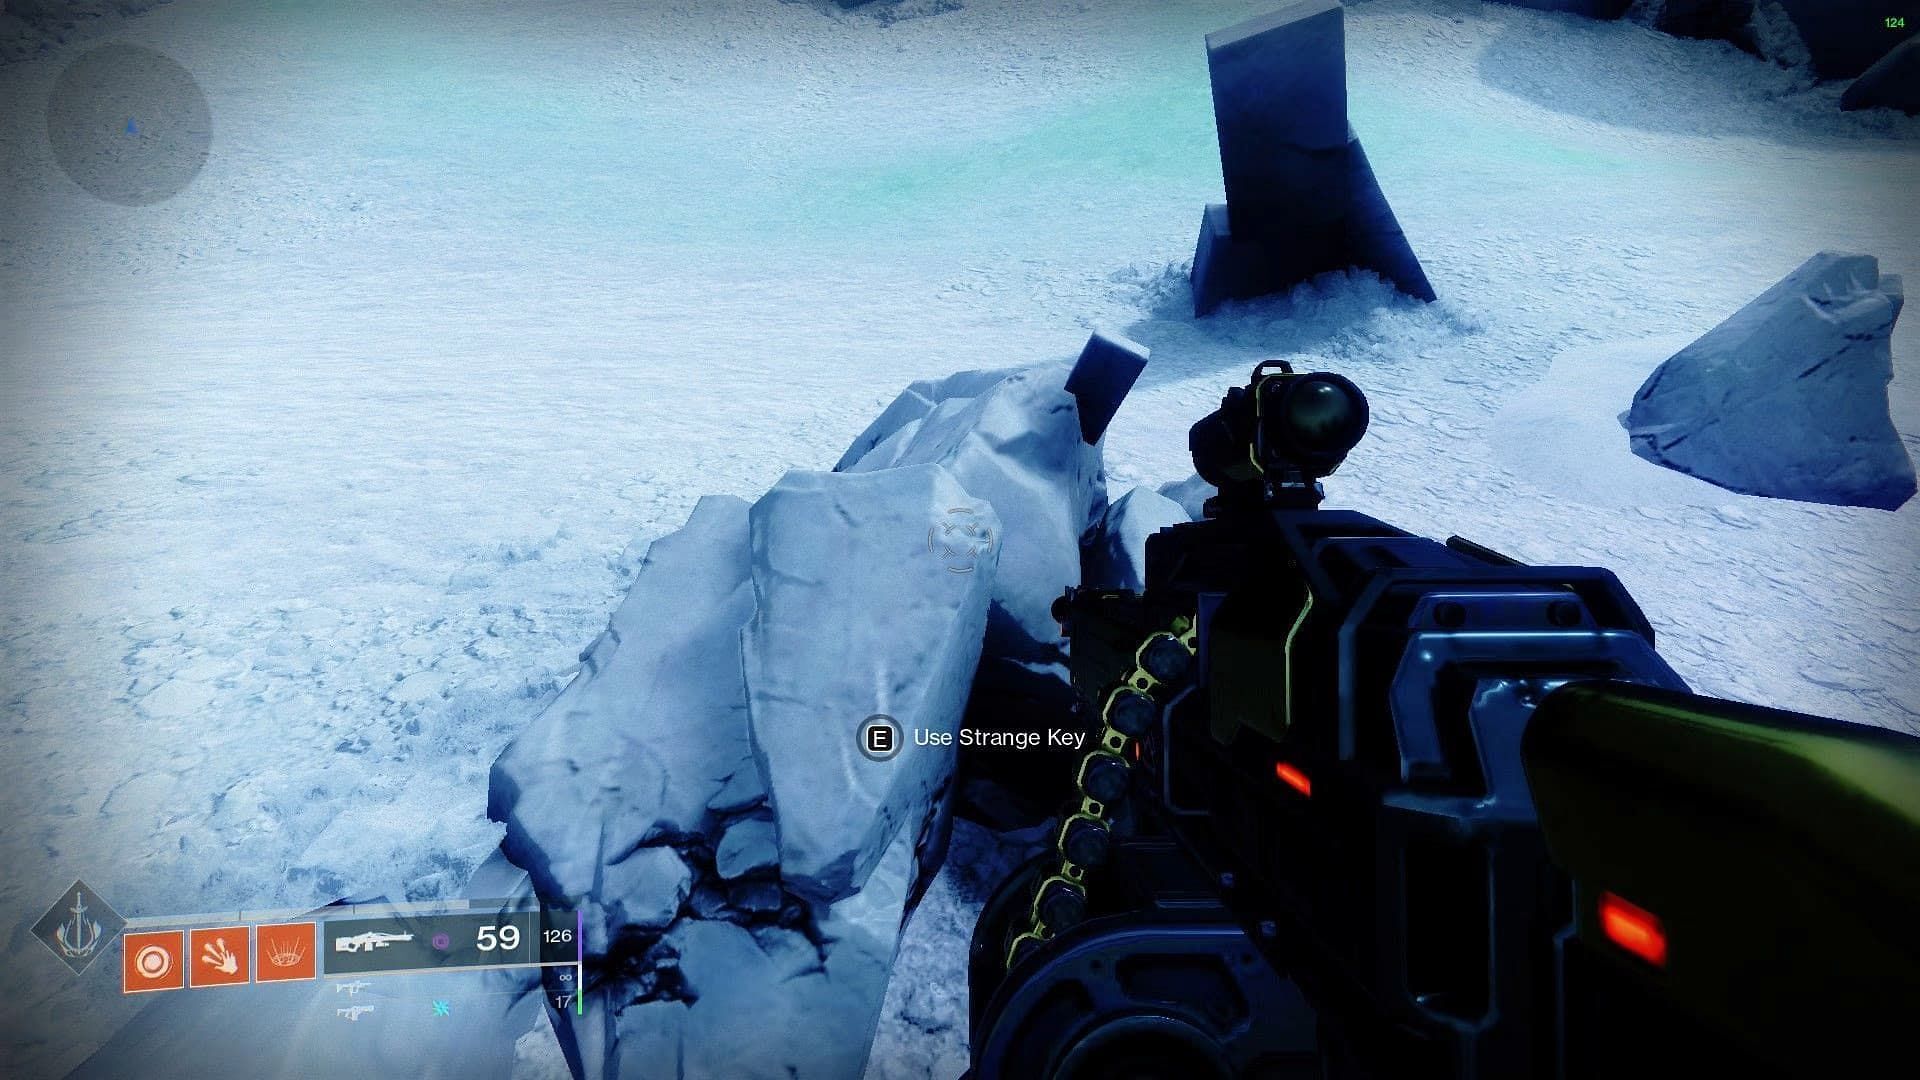 Interacting with these rocks will help unlock the direction to the Forerunner in Destiny 2 (Screenshot by Sportskeeda)